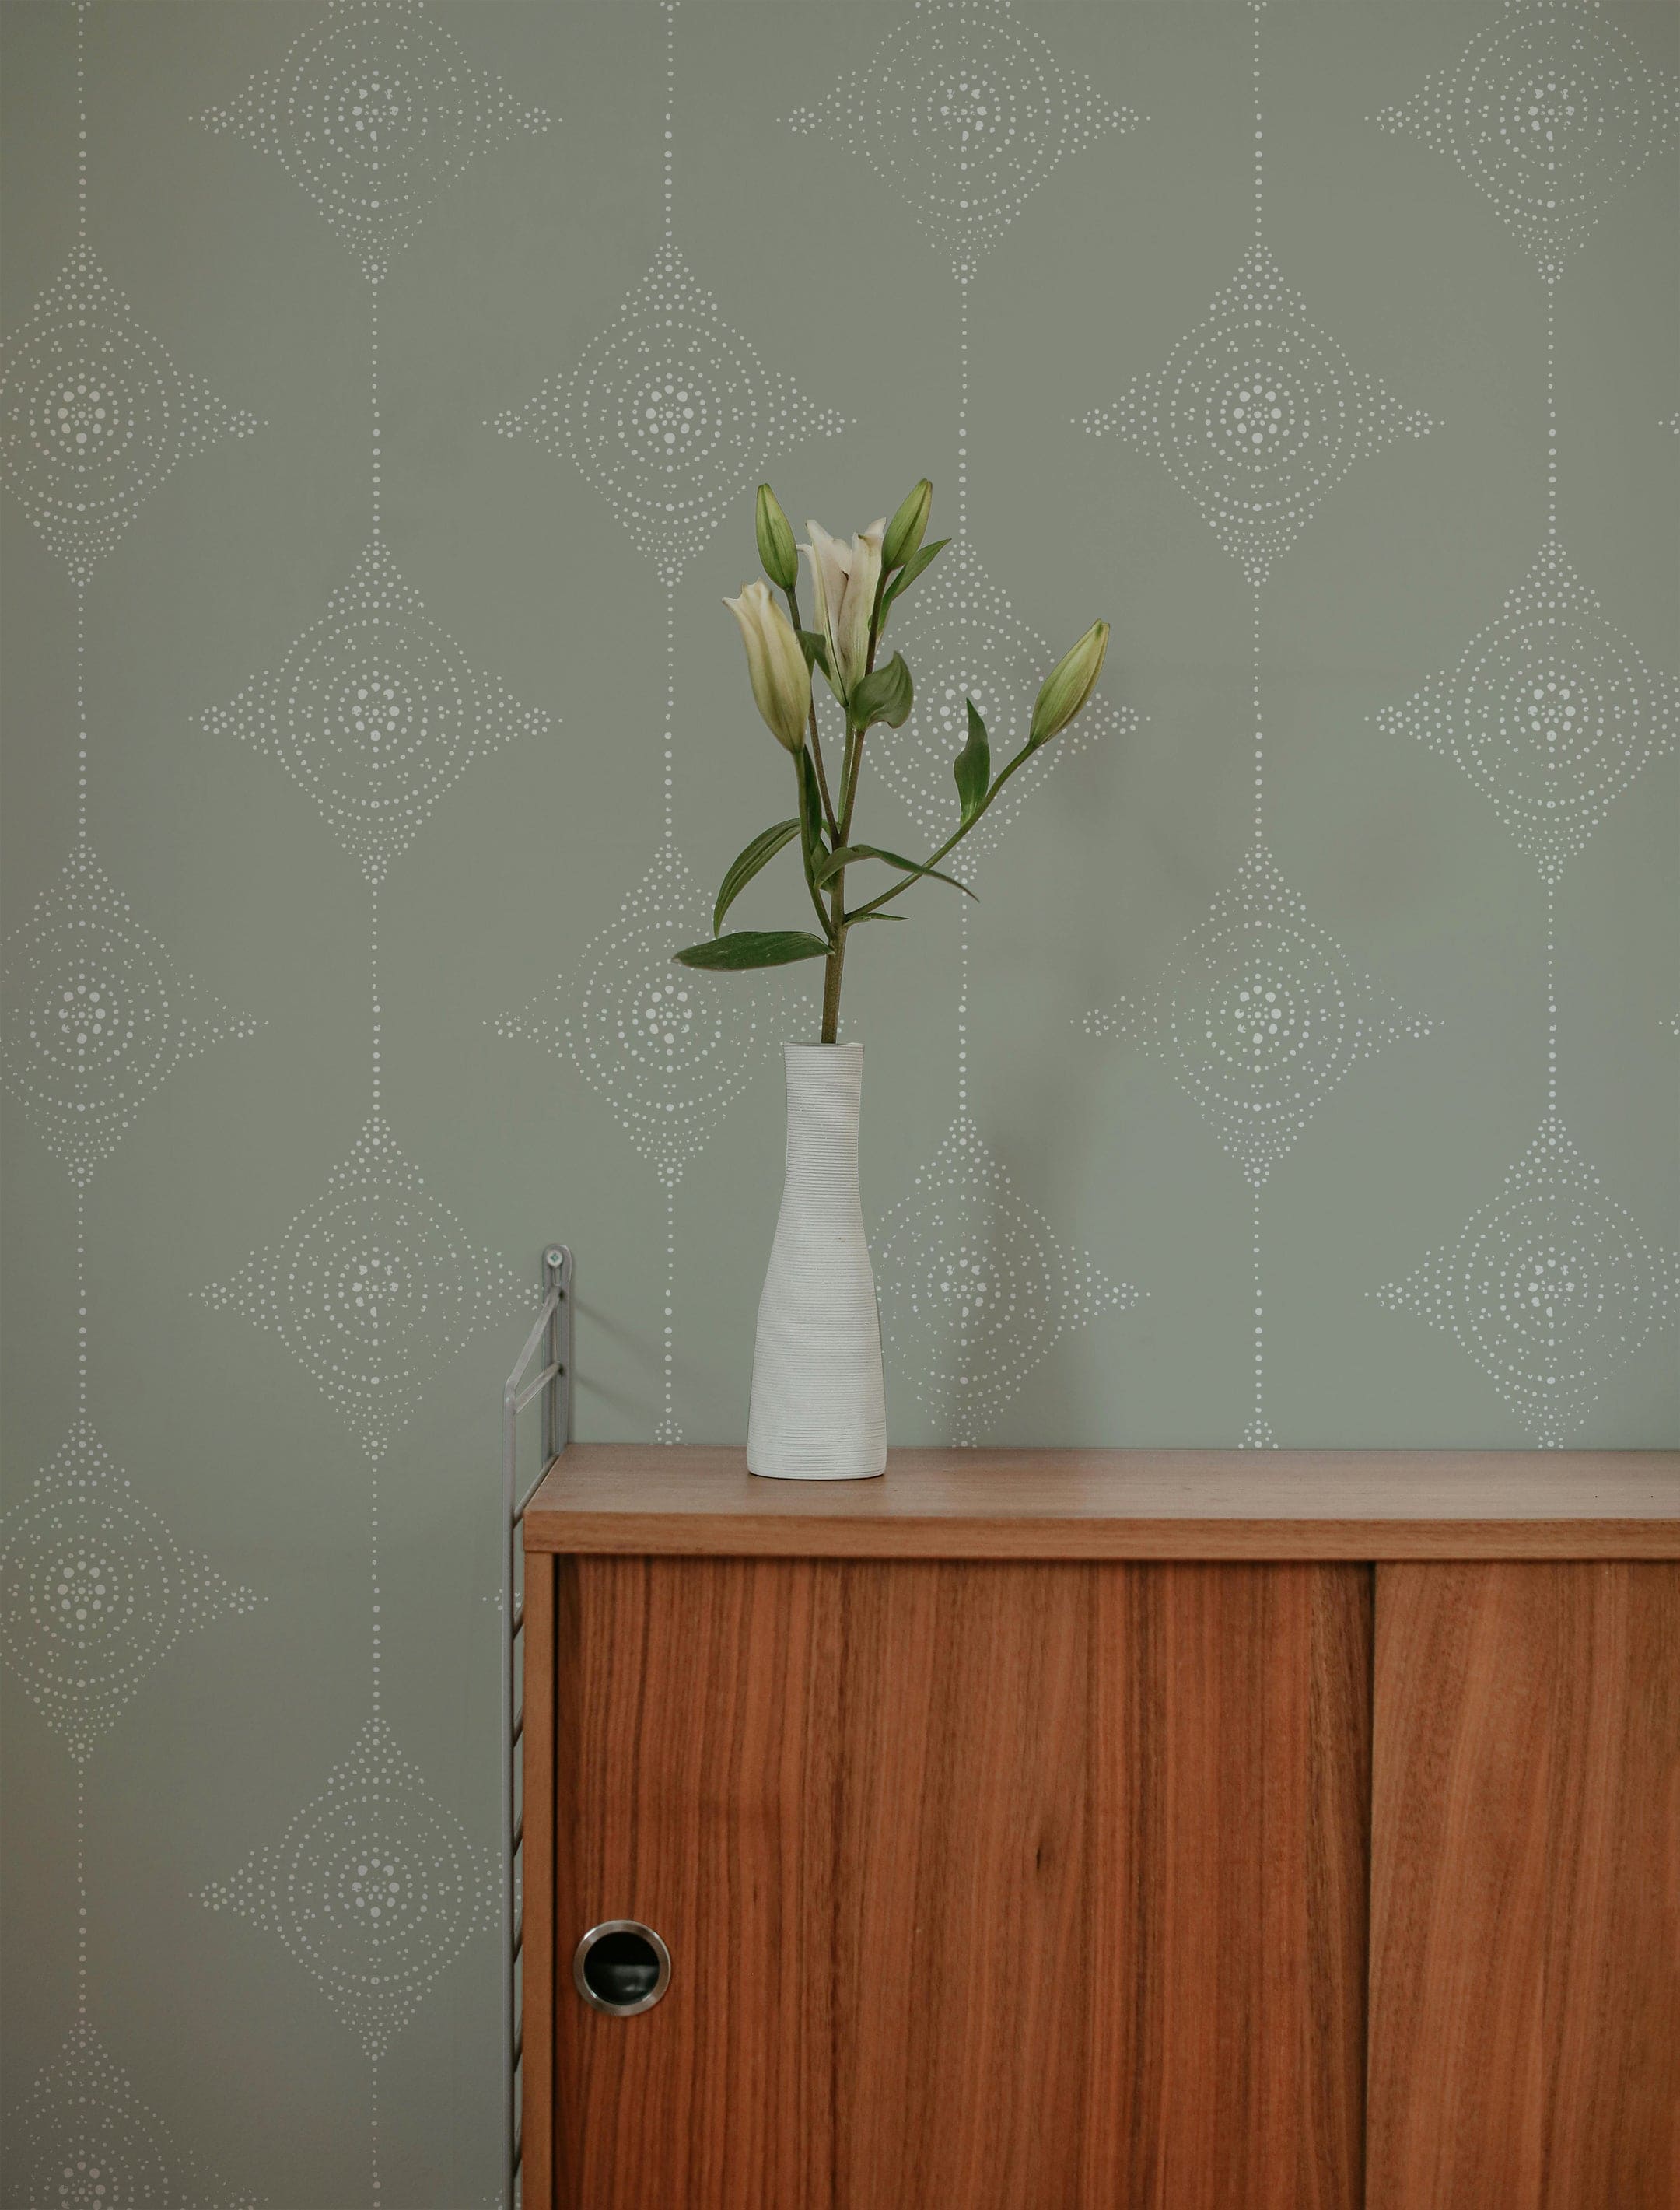 An interior scene featuring the Serenity Circles Wallpaper. The wallpaper's pattern of white circles on an olive green background provides a serene backdrop for a minimalist wooden console table adorned with a single white vase holding a blooming flower.